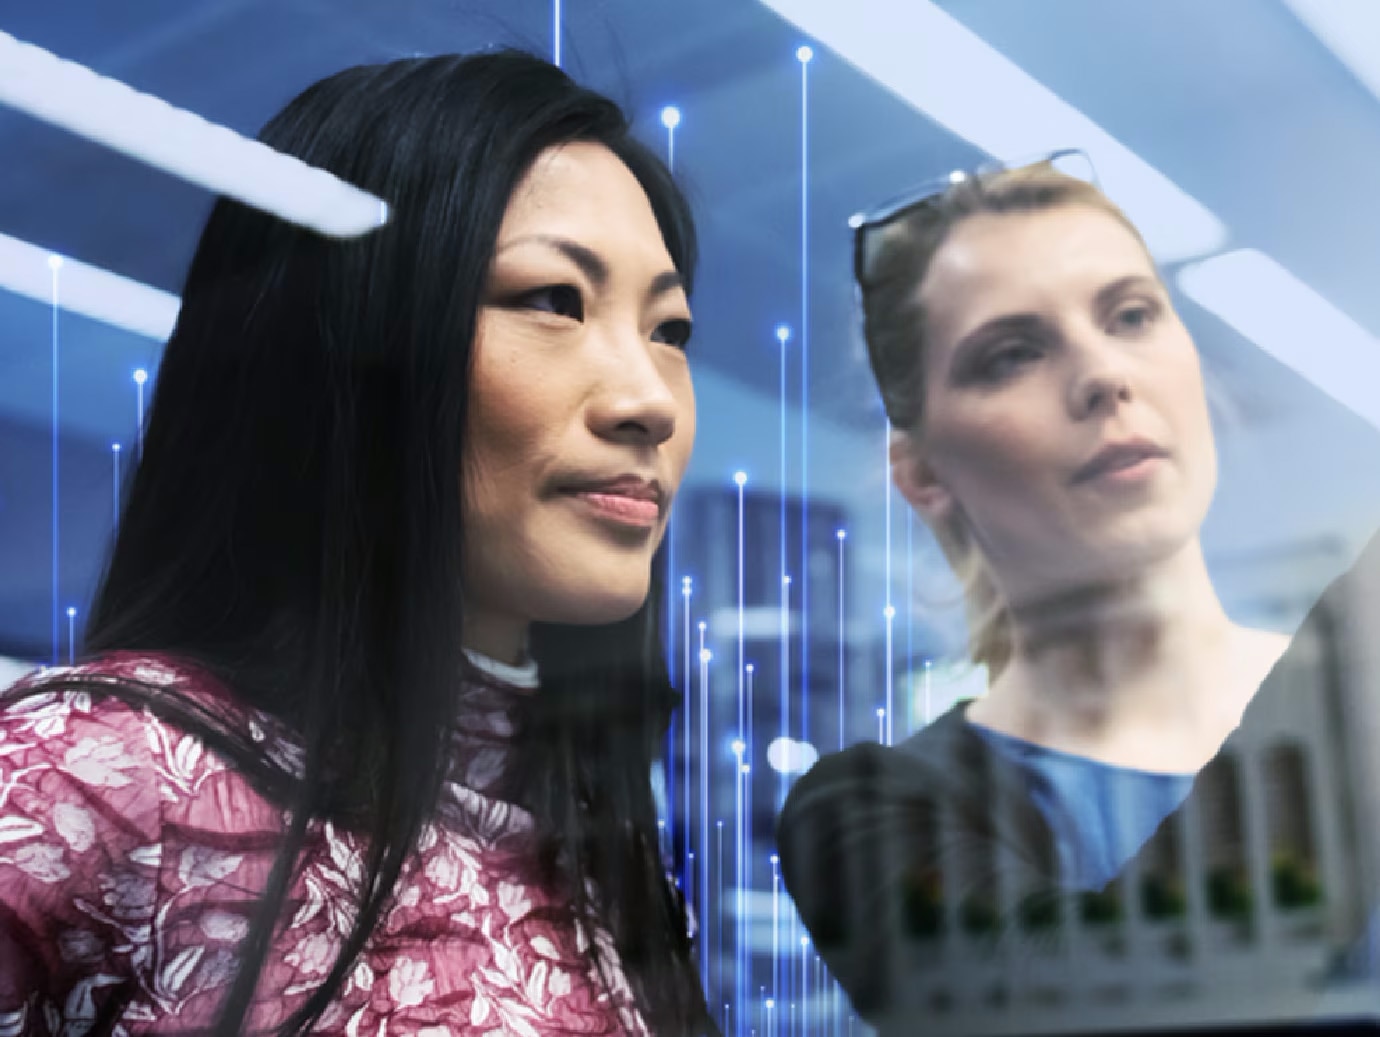 Two women looking into the distance as one of them points at something, overlaid with OpenBlue graphics